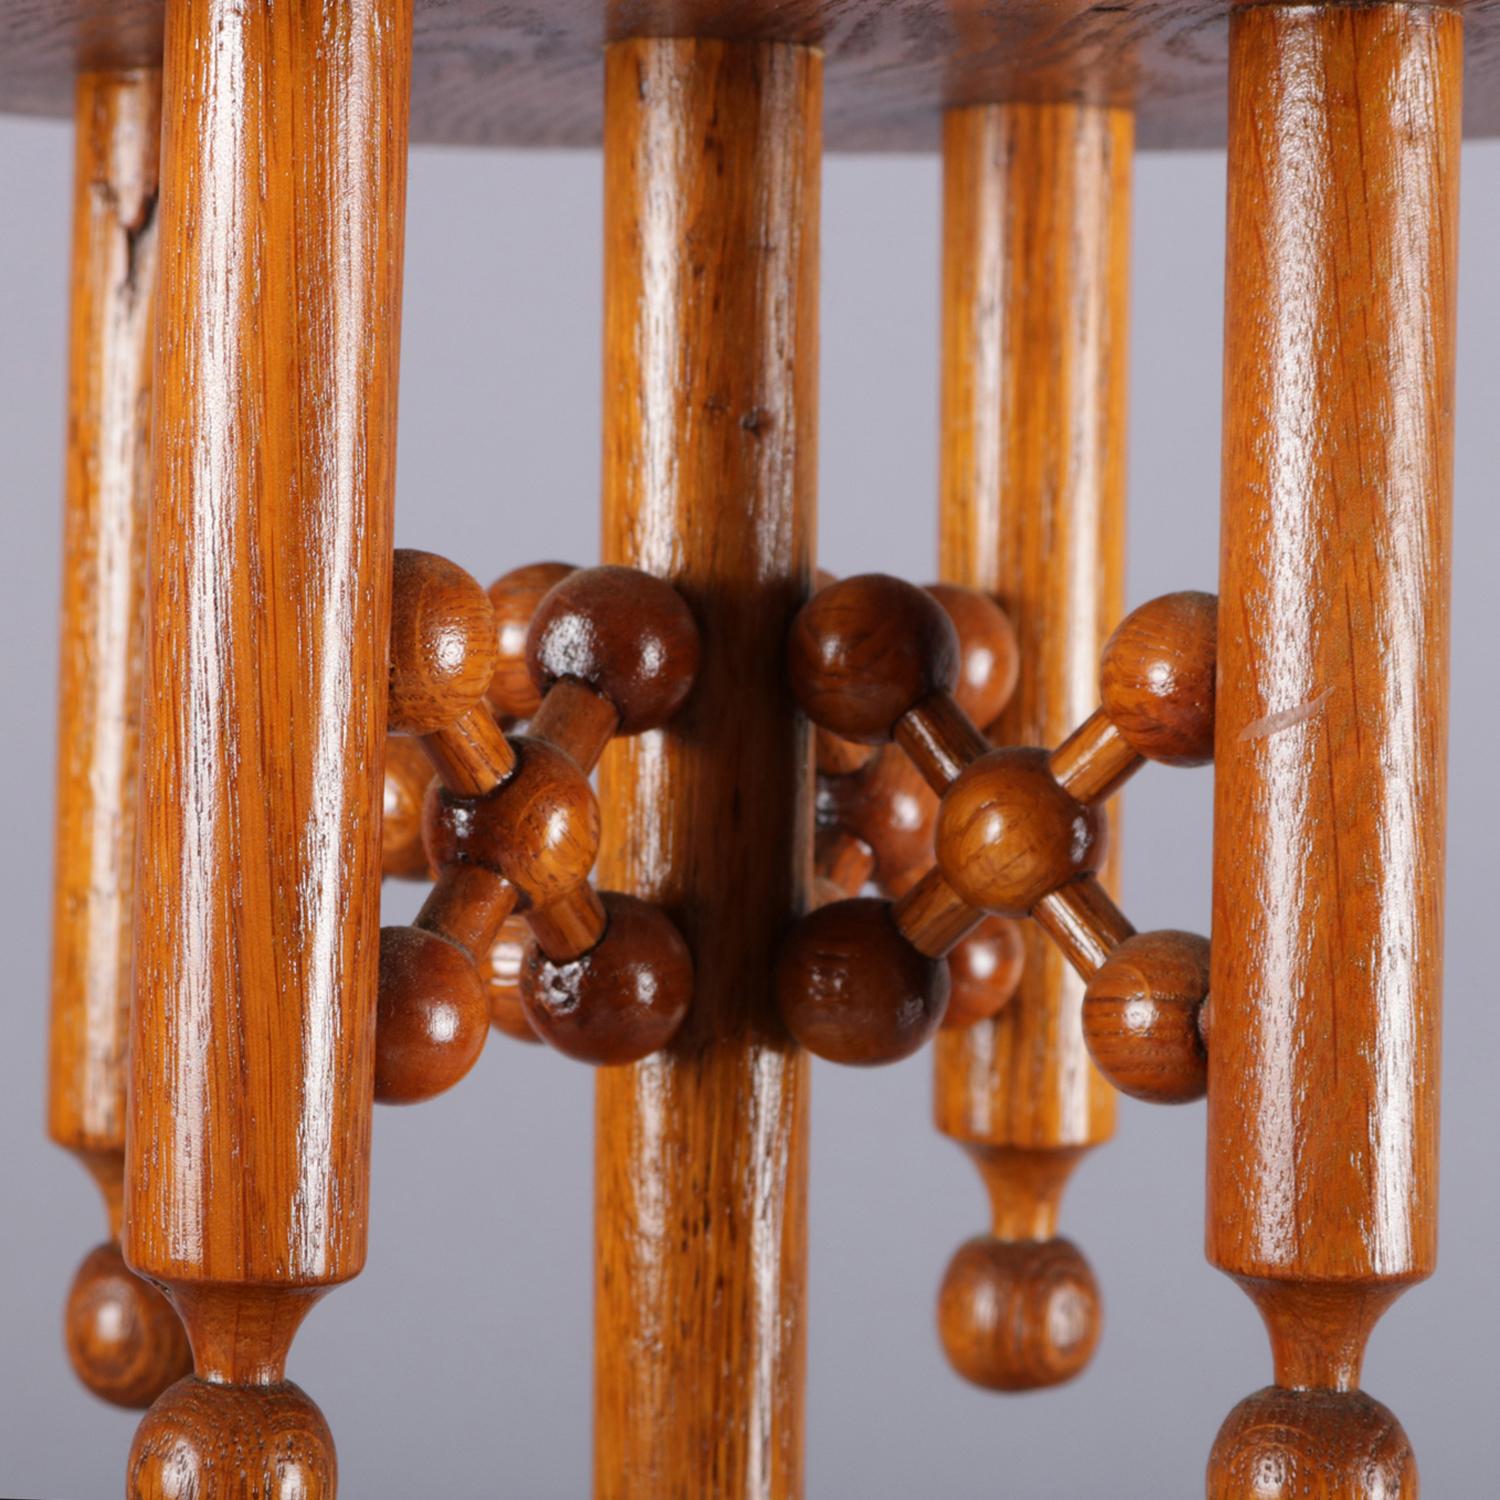 American Antique Carved Oak Stick and Ball Adjustable Piano Stool, circa 1880